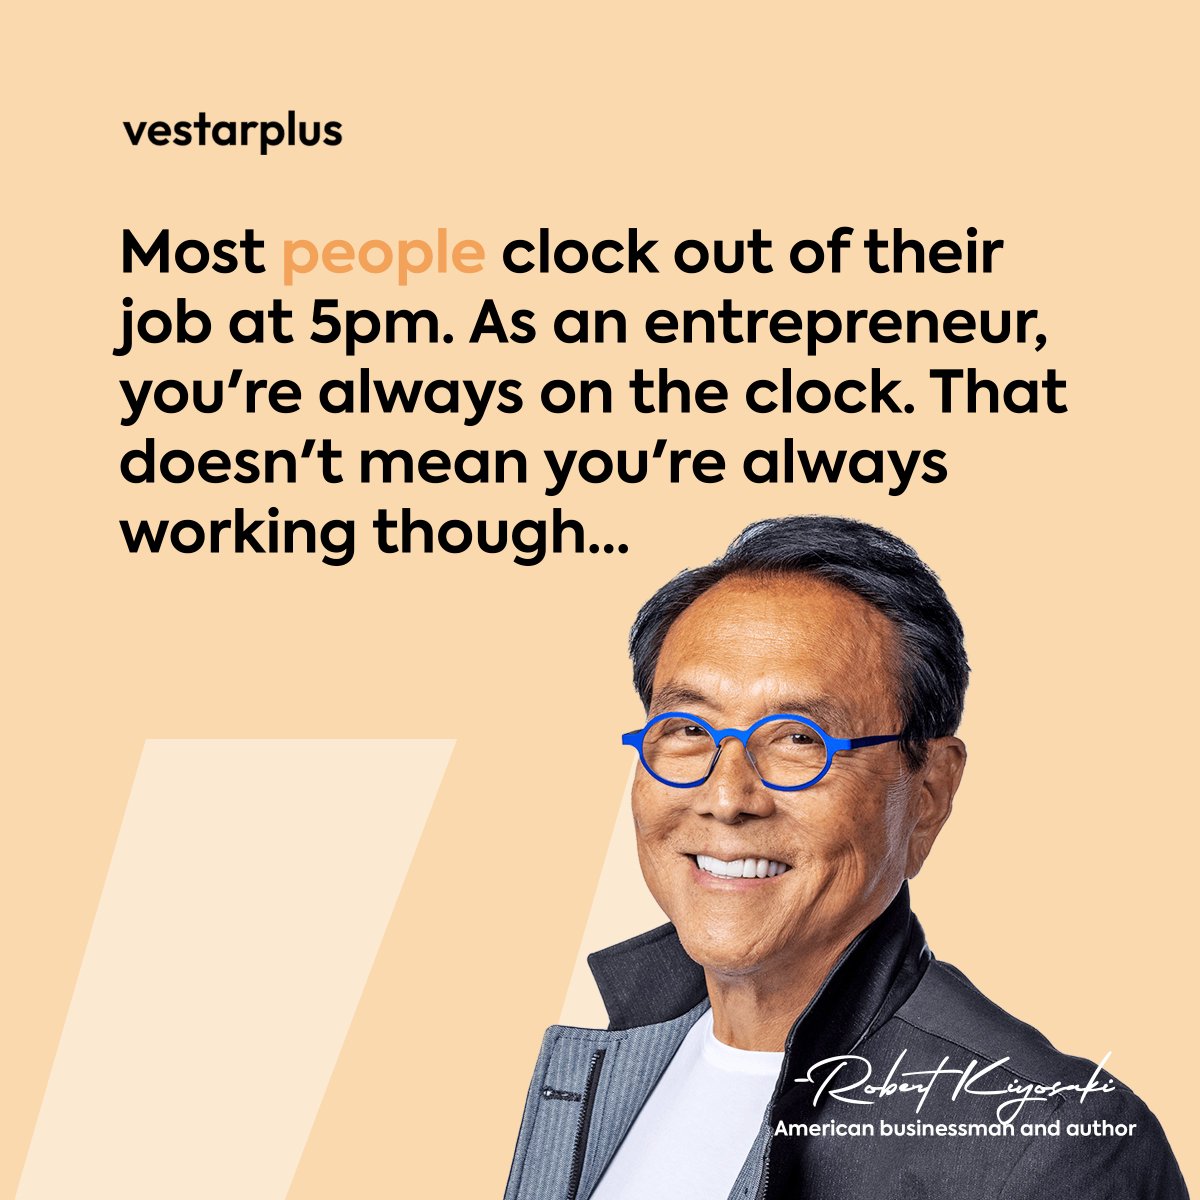 Most people clock out of their job at 5pm. As an entrepreneur, you're always on the clock. That doesn't mean your're always working though'... Robert Kiyosaki. #quotes #office #growth #growthmindset #business #tech #startup #entreprenuer #sme